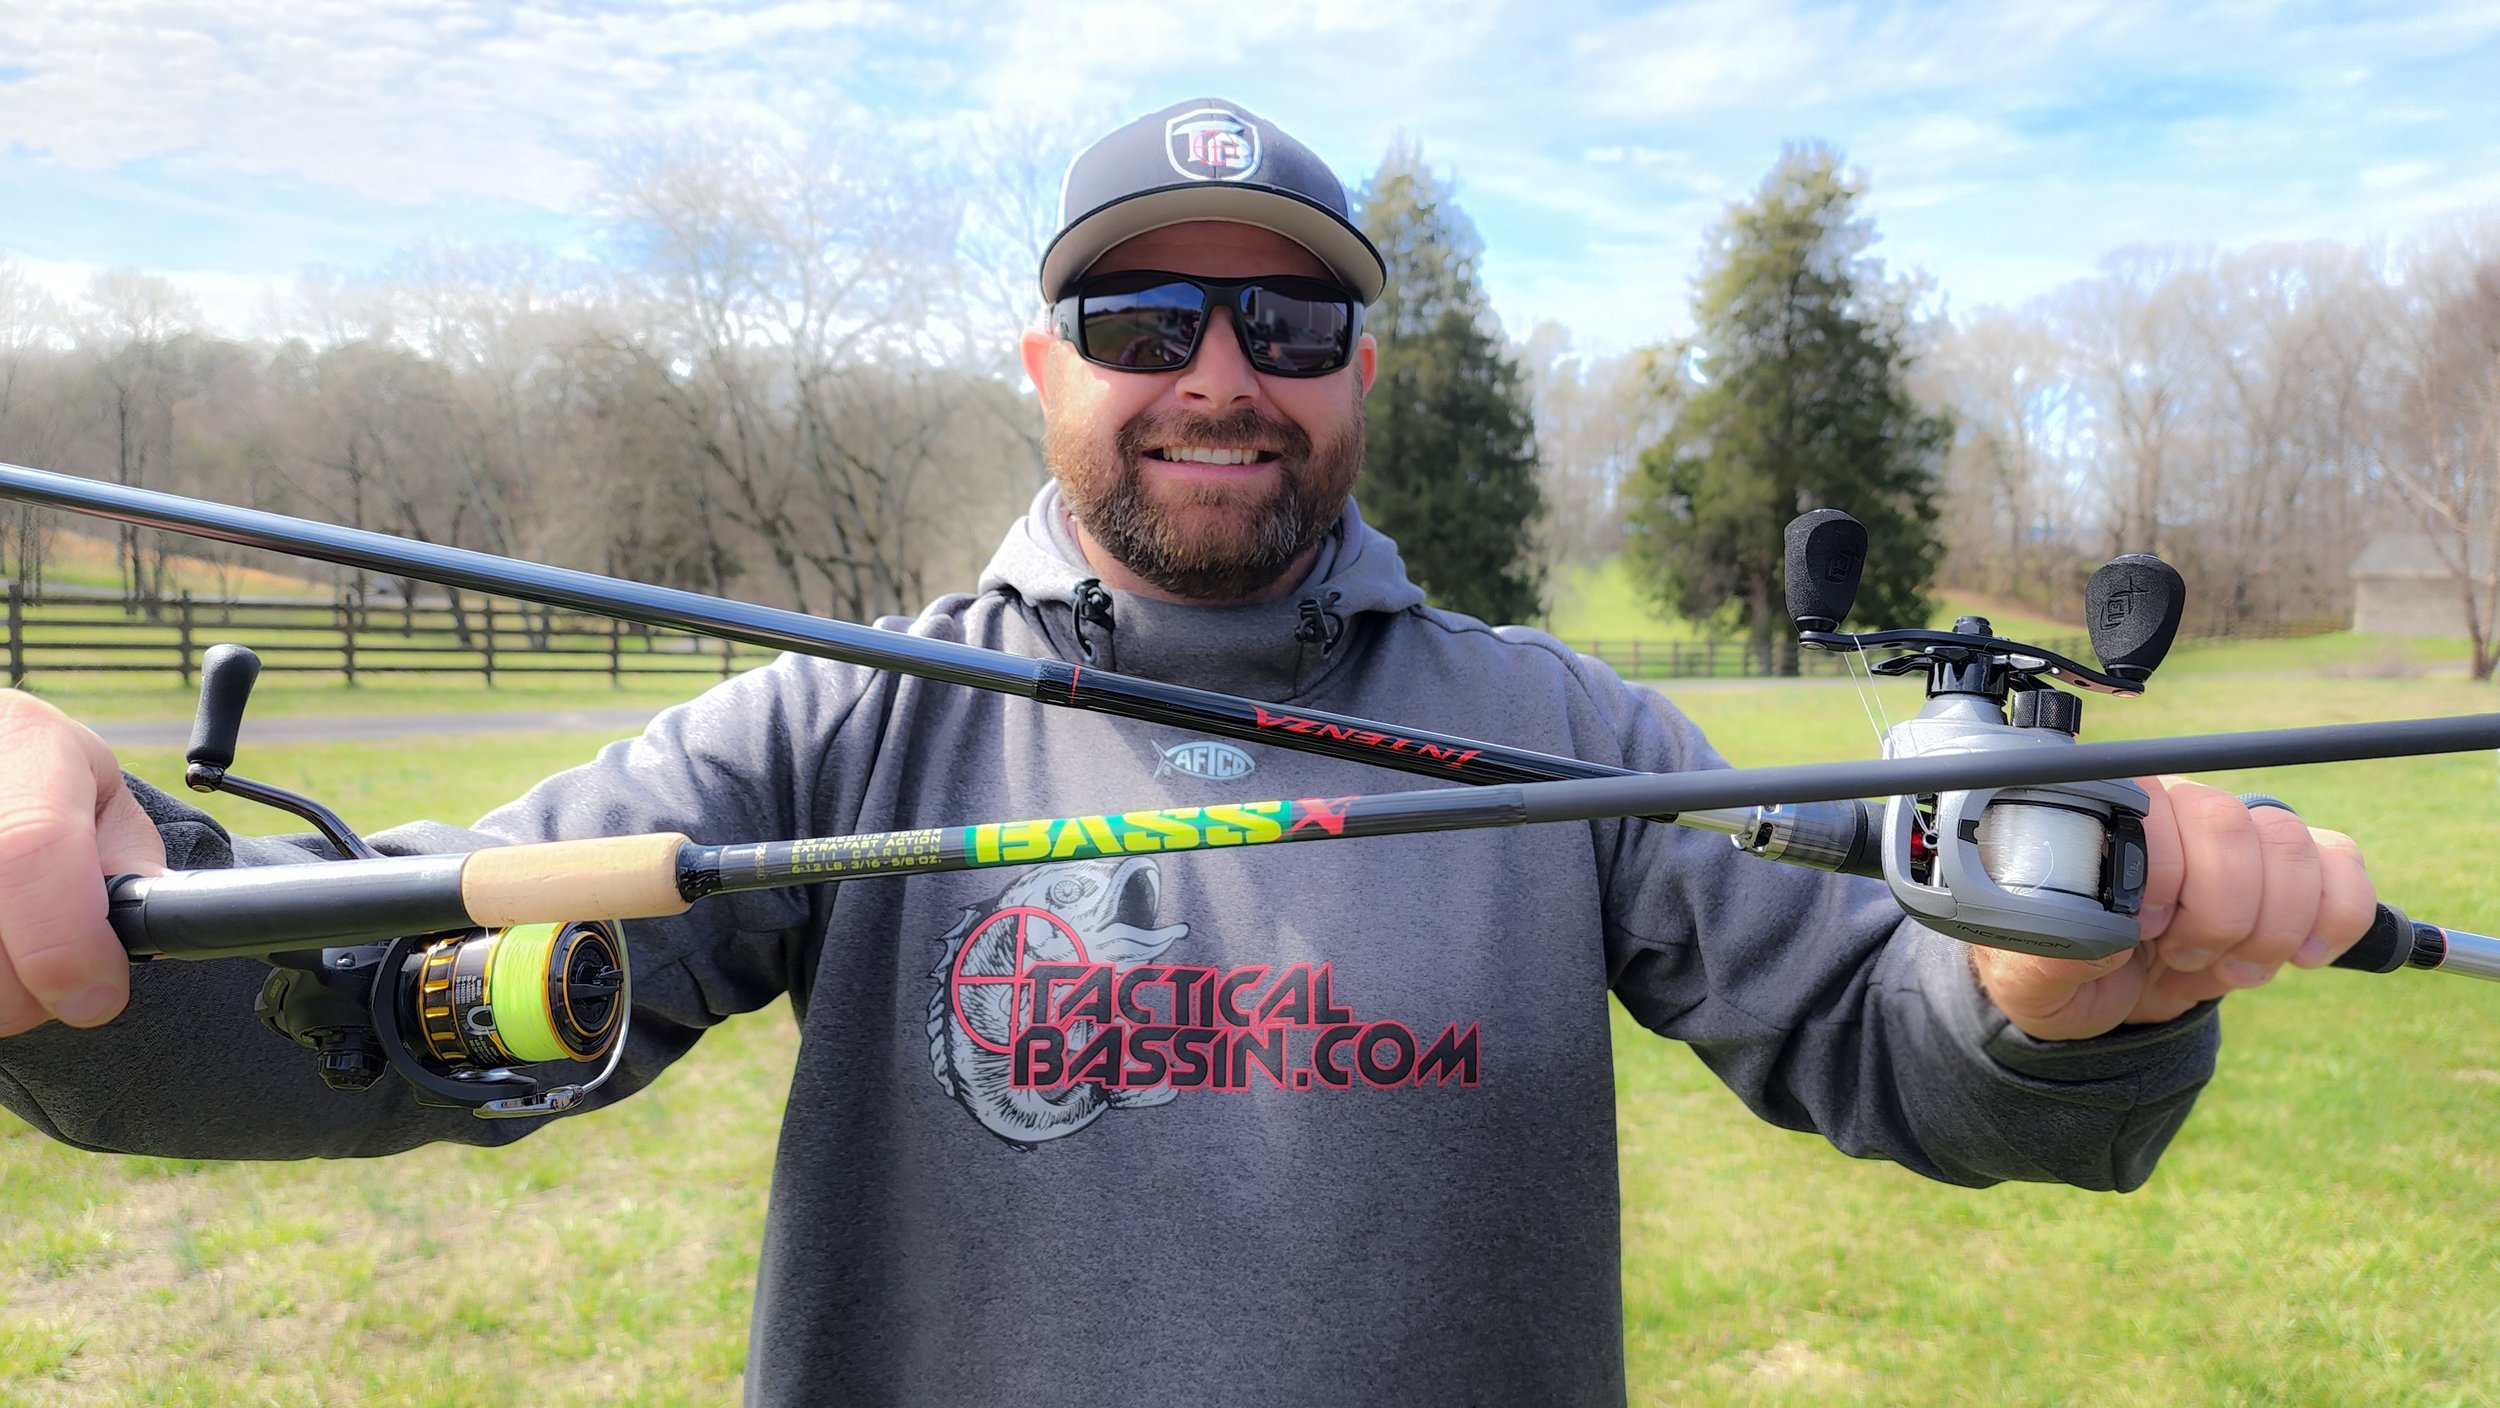 Spring Buyer's Guide: Budget Rods and Reels For Bass Fishing